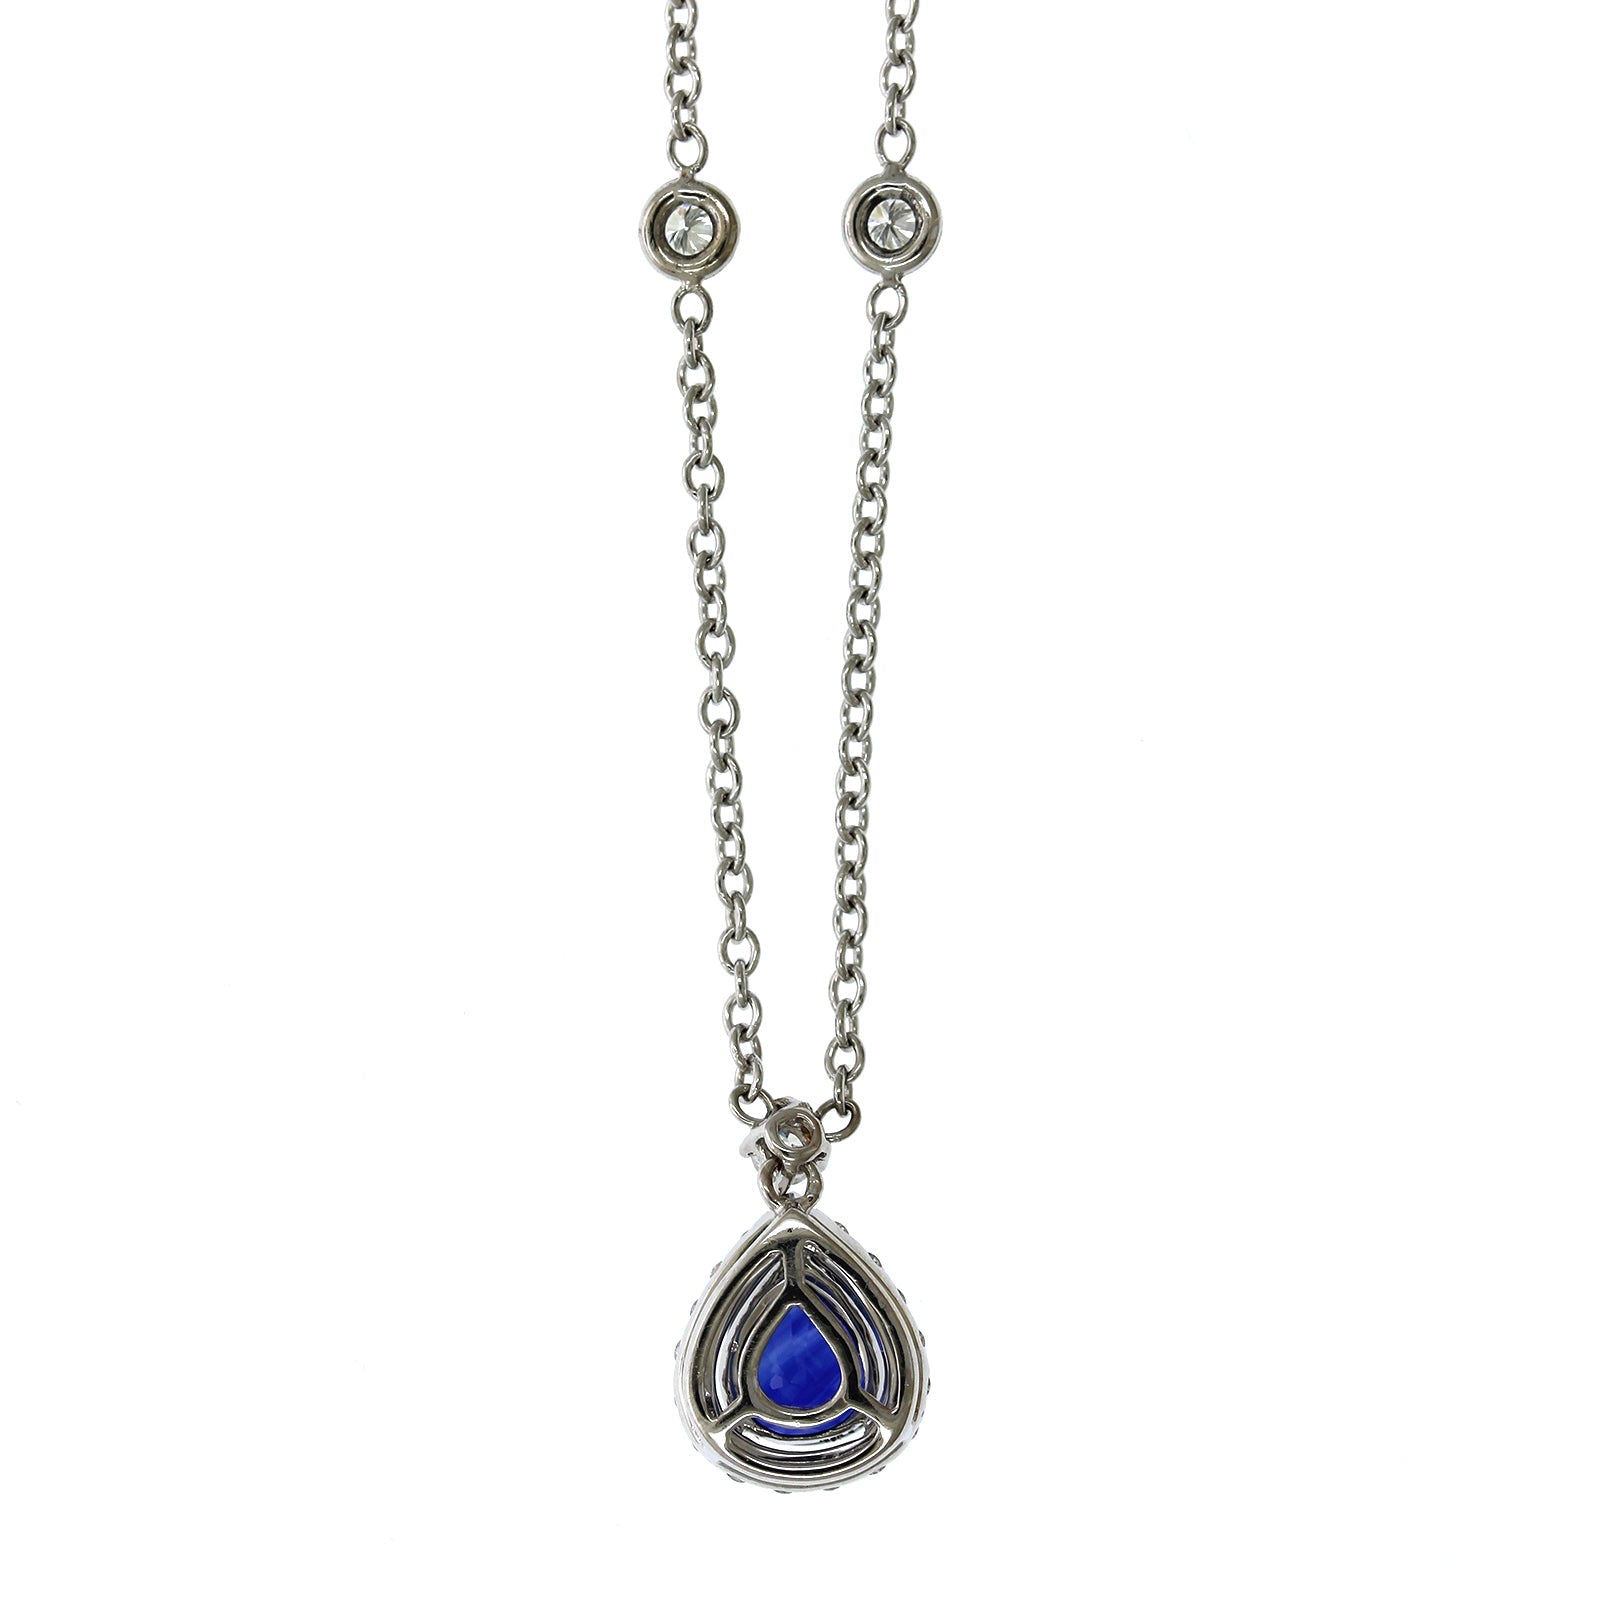 18K White Gold Sapphire Diamond Halo Necklace, 18k white gold, Long's Jewelers